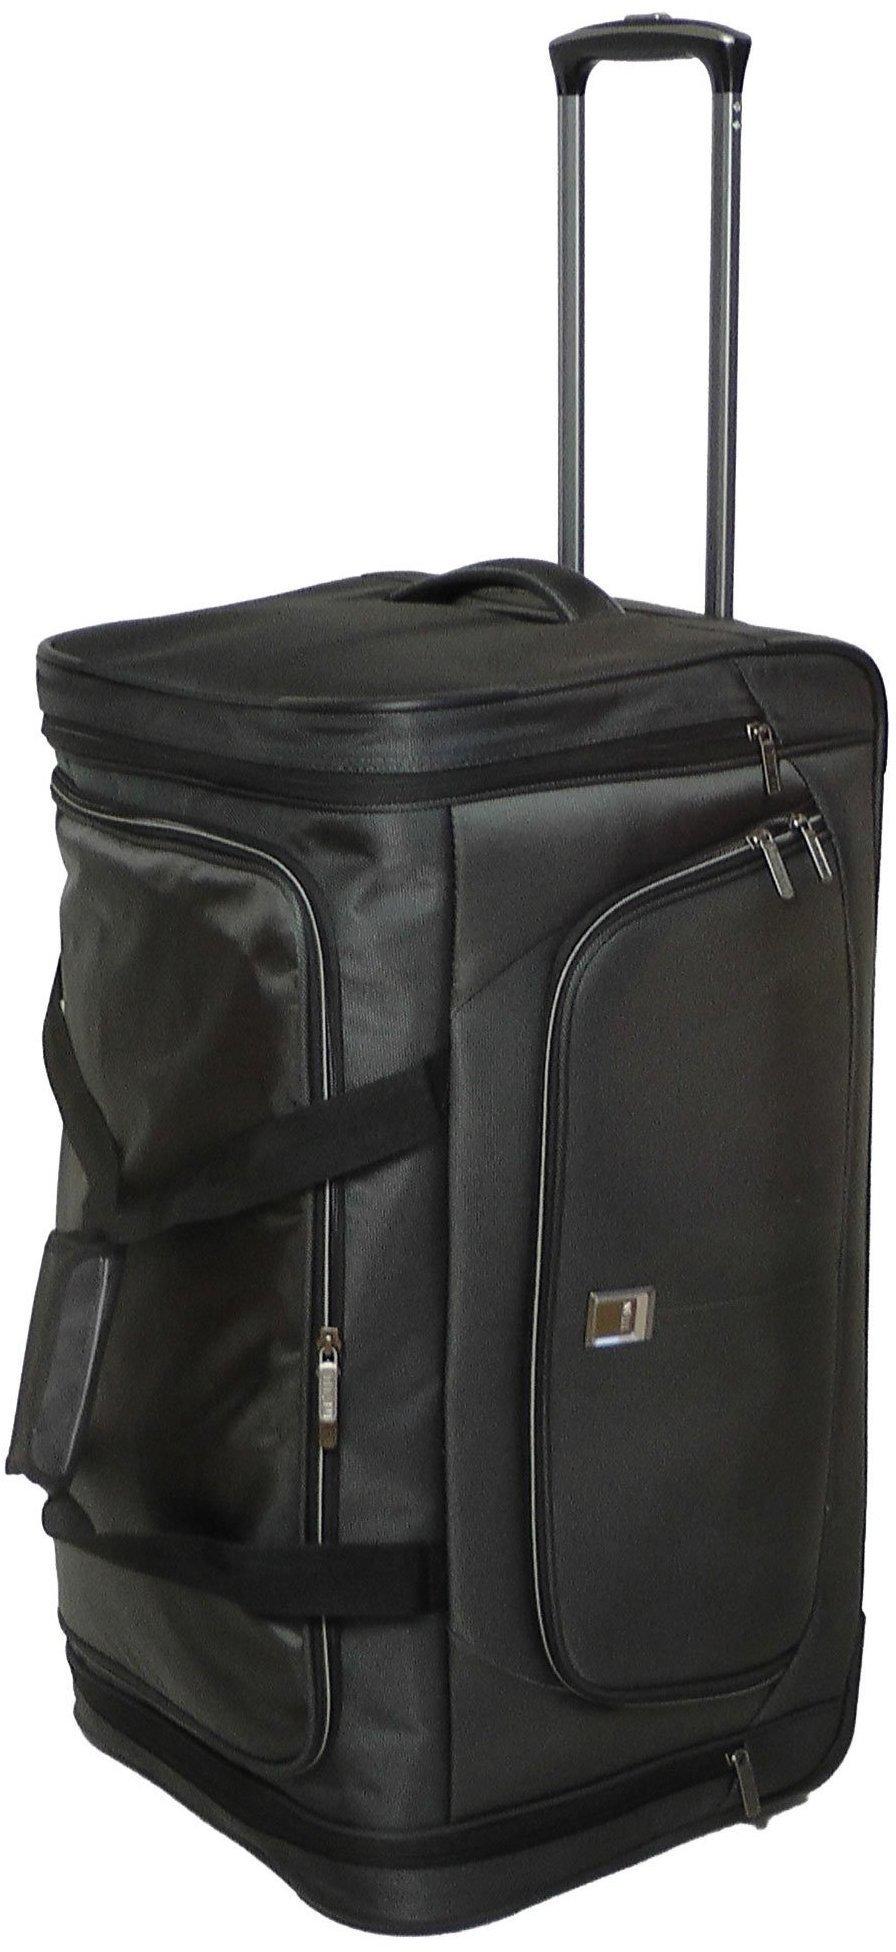 NONSTOP Trolley Travelbag Antracite 382601-04